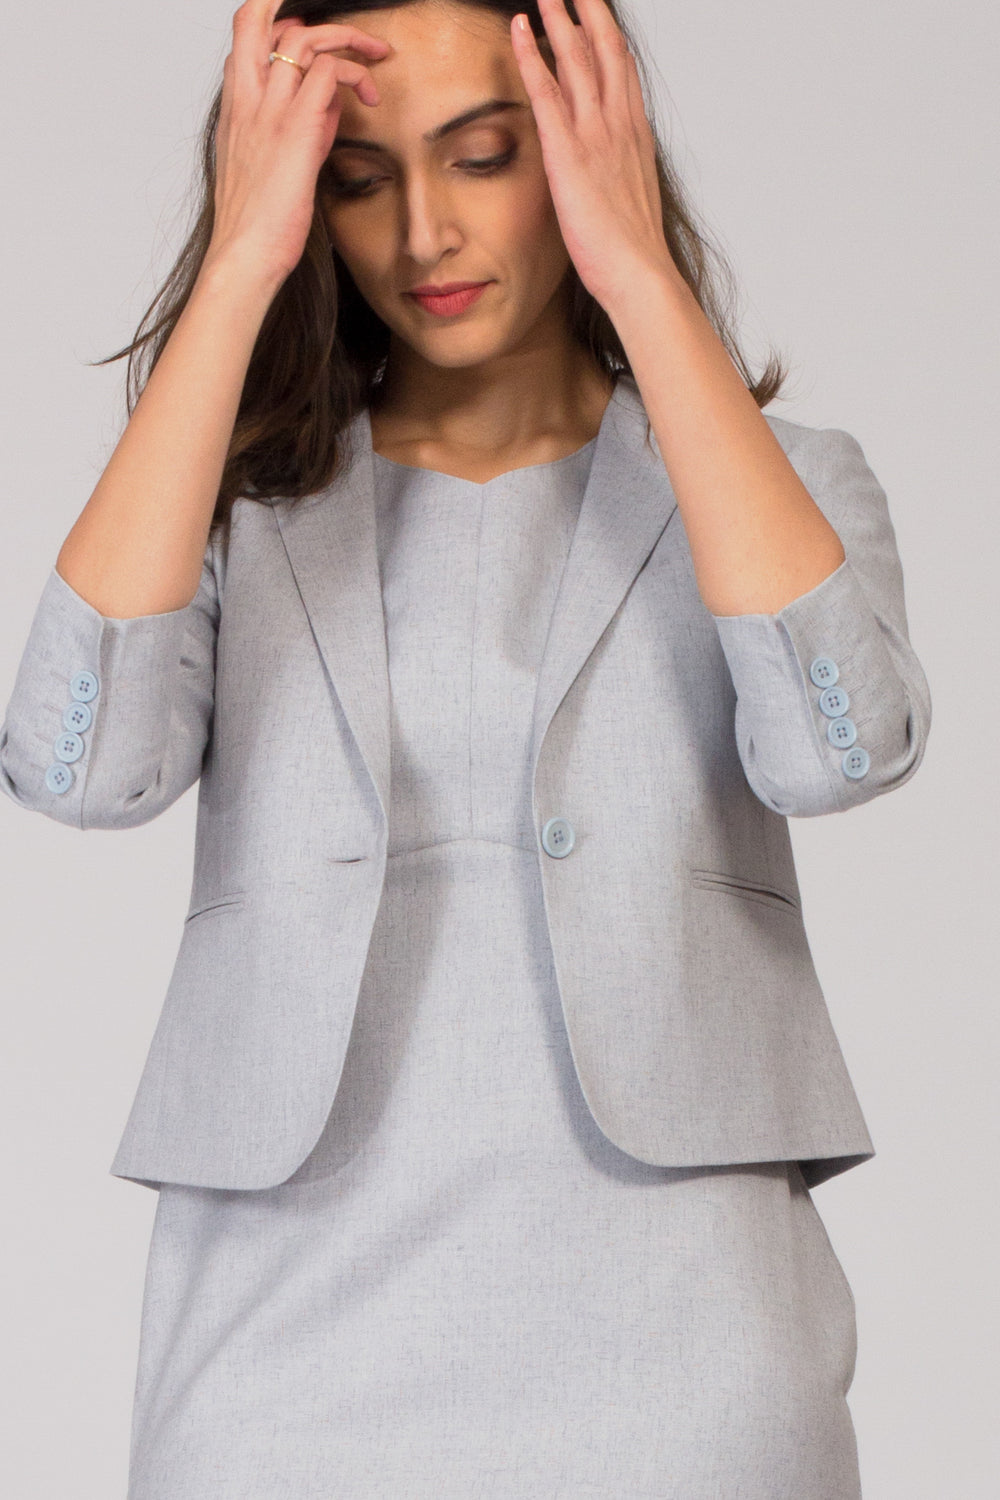 Light Blue Semi Formal Blazer Suit for work. Buy stylish office formal pant-suits, formal dresses, skirts and formal trousers and other professional looks online at www.intermod.in